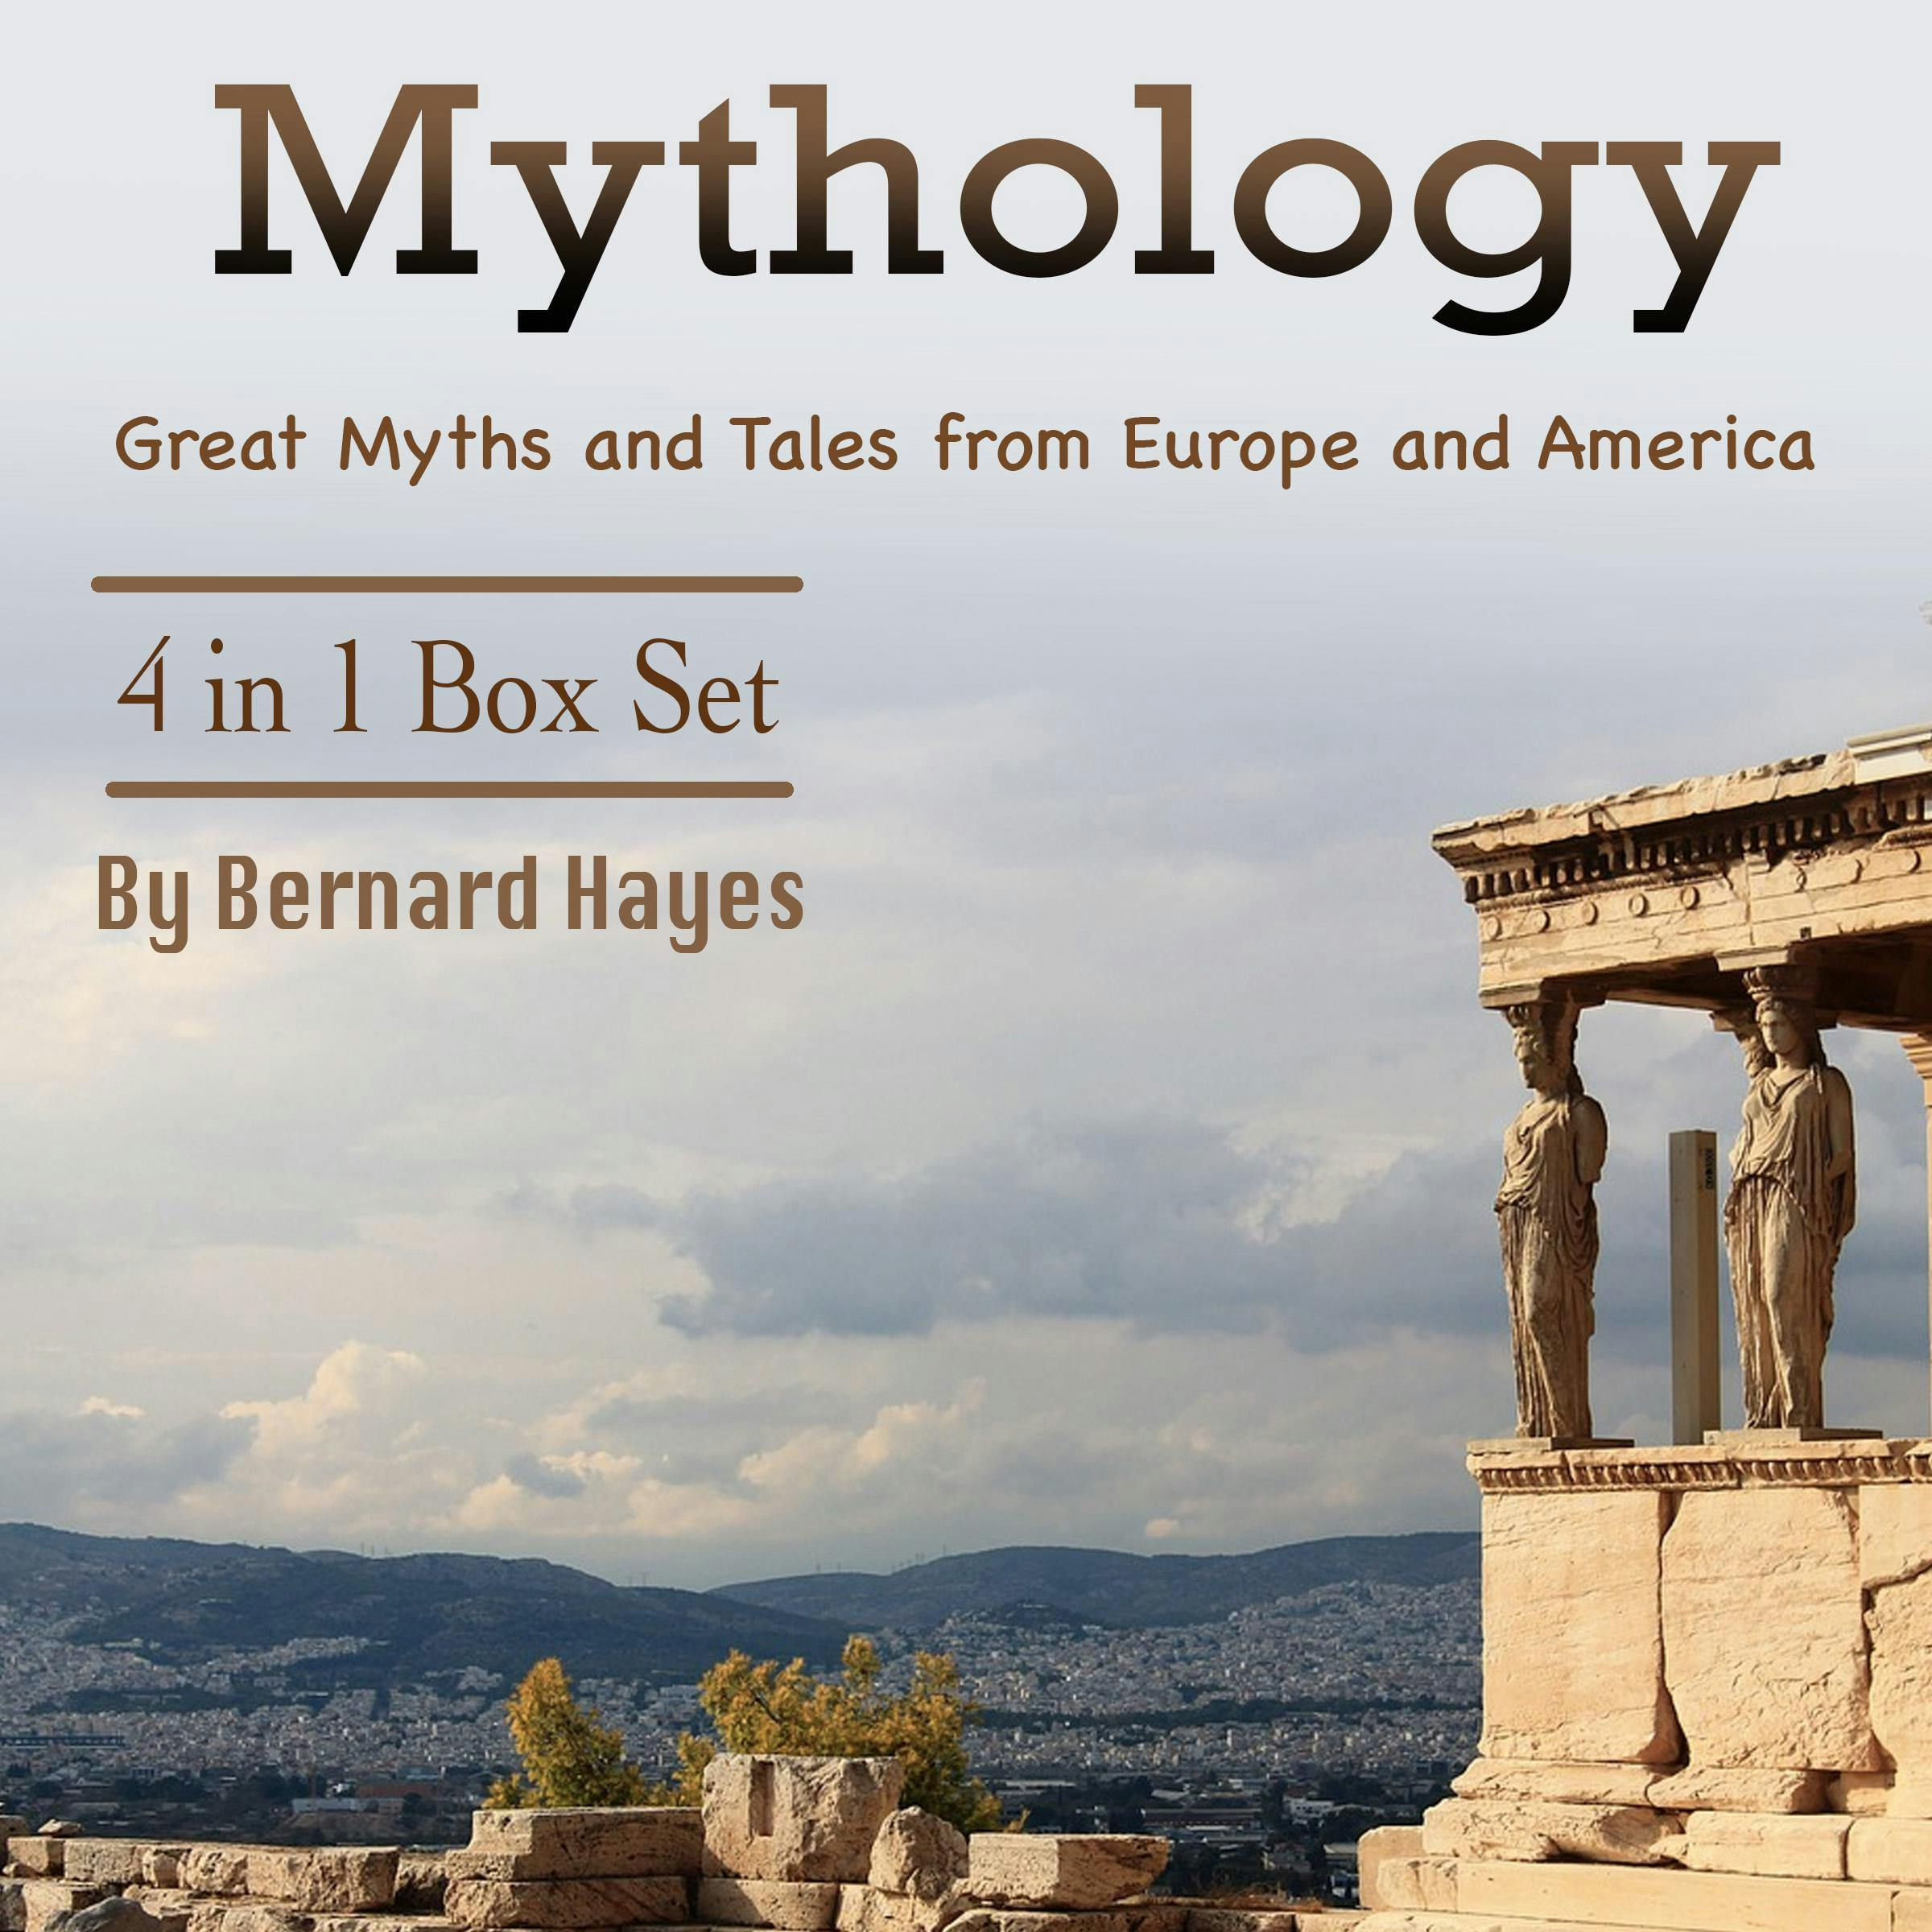 Mythology: Great Myths and Tales from Europe and America - Bernard Hayes